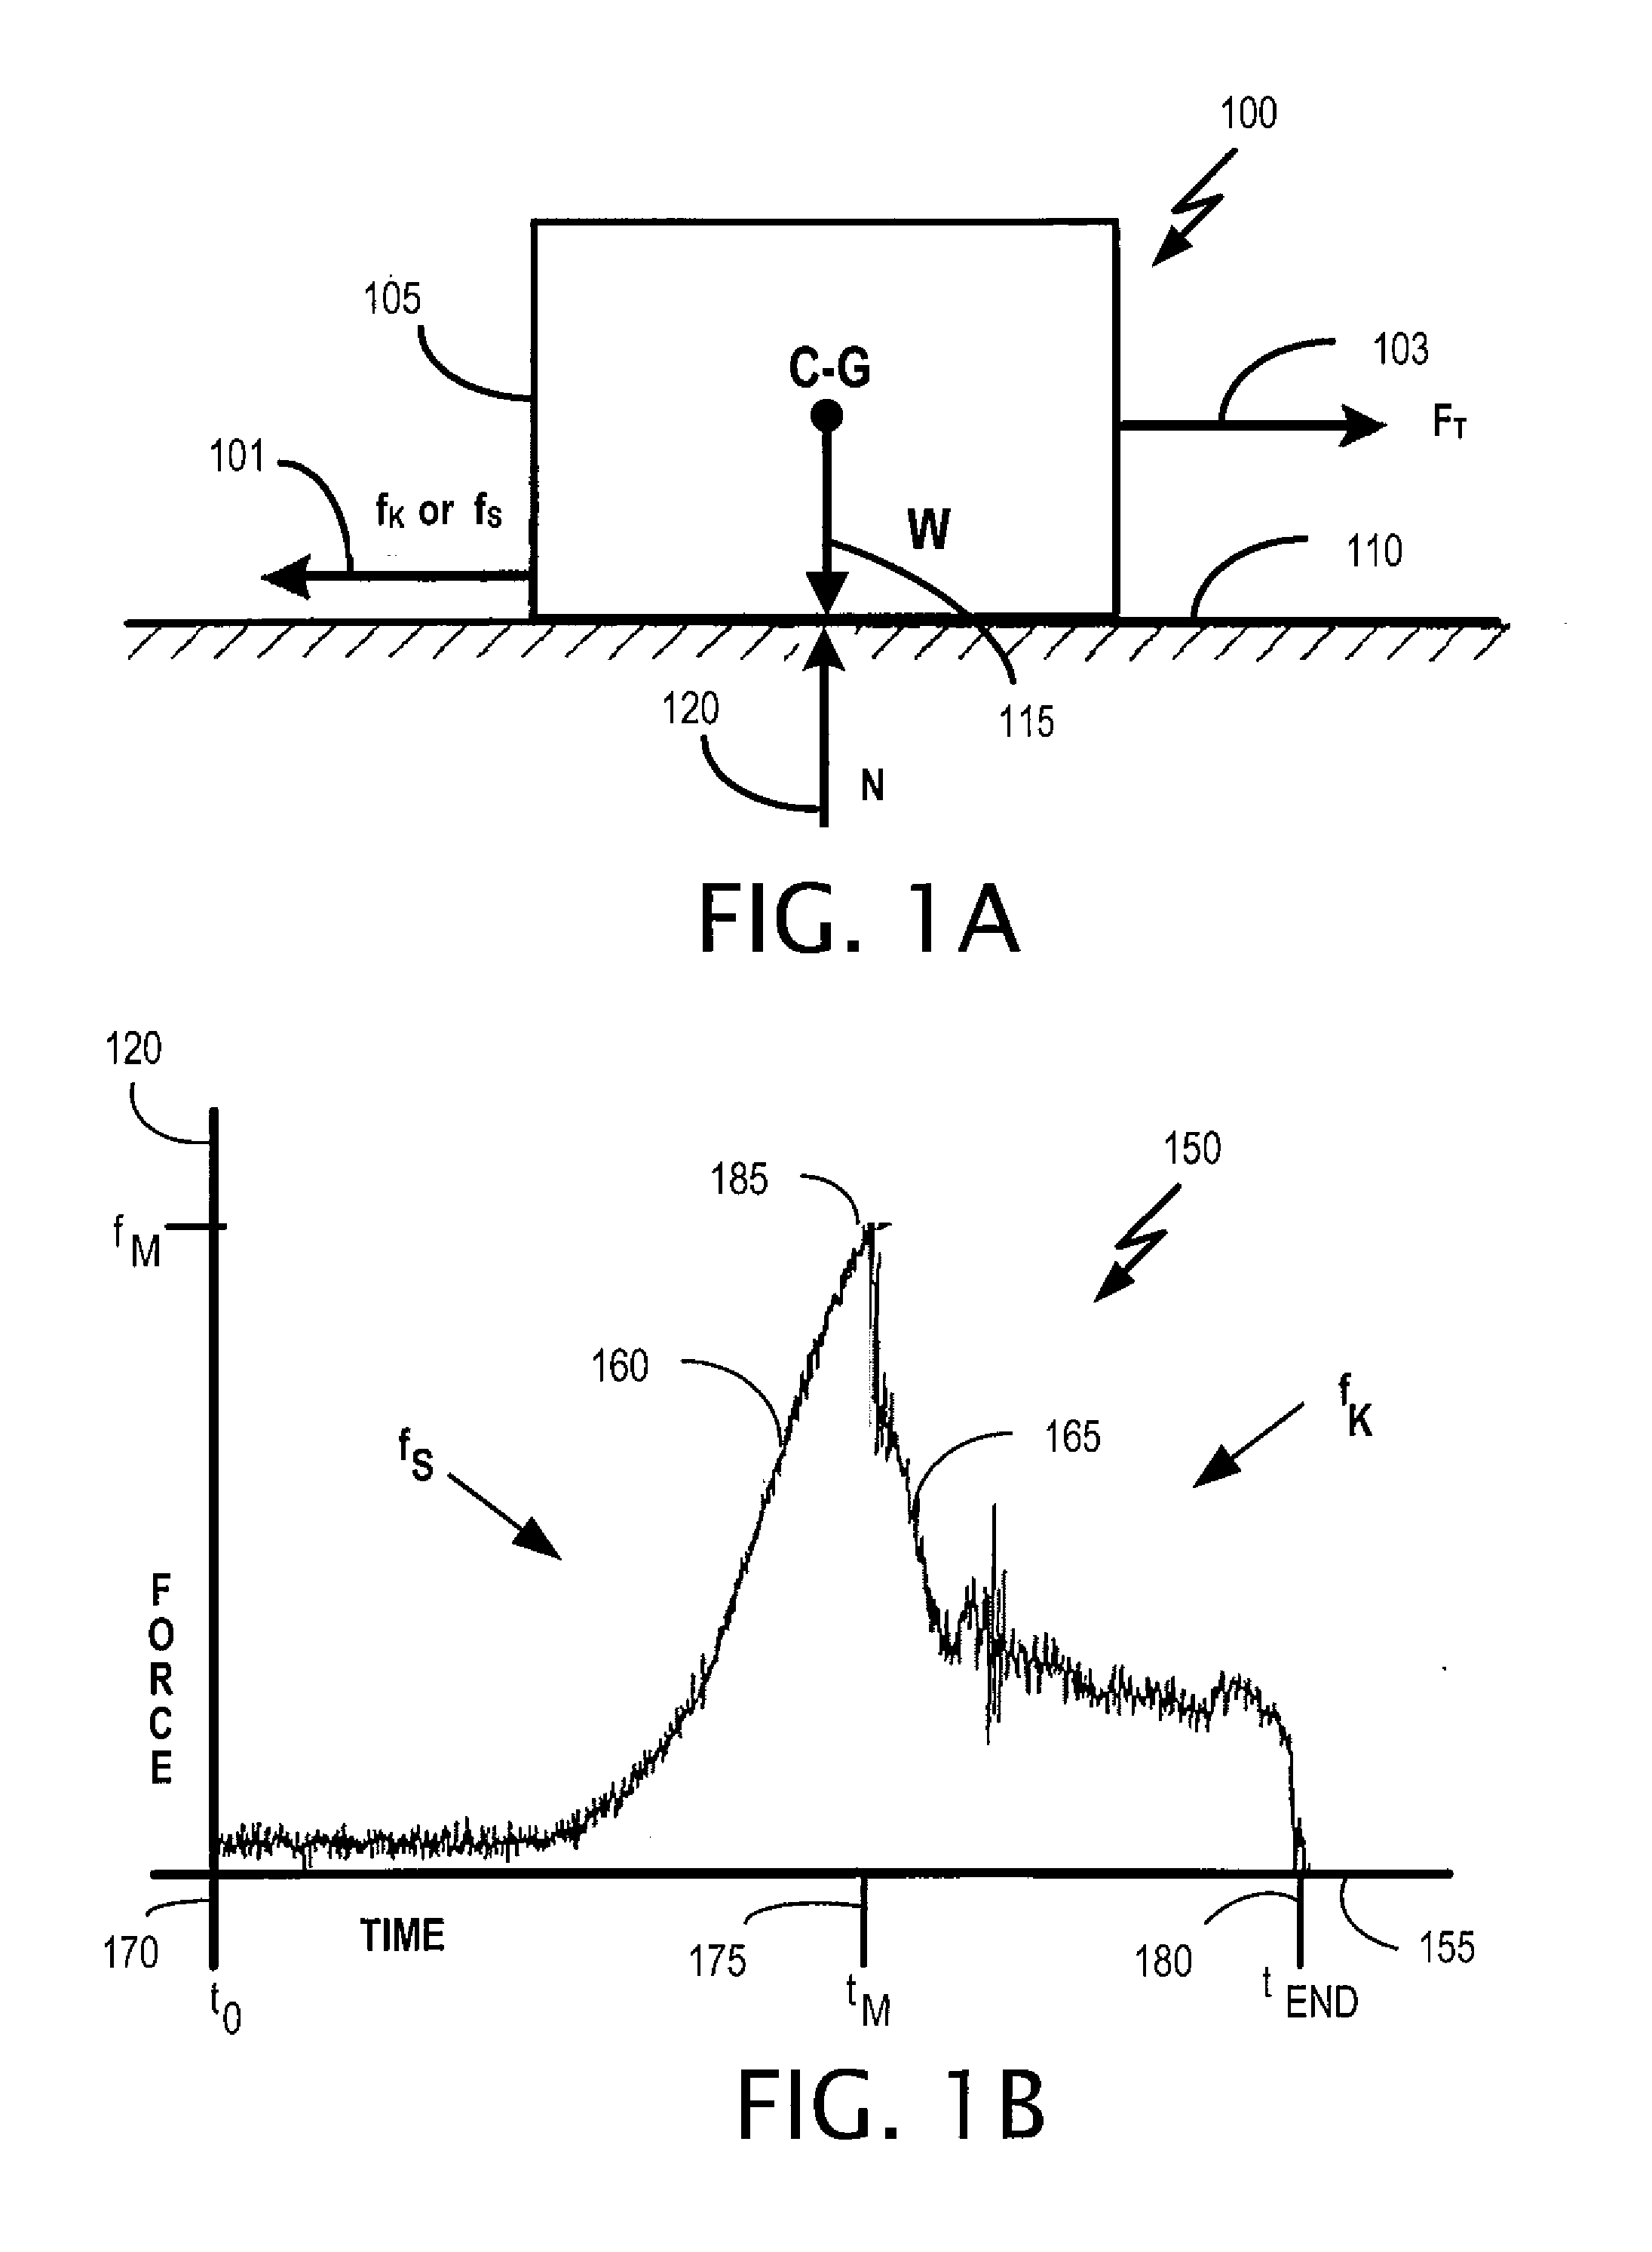 Intrinsically-calibrated tribometer